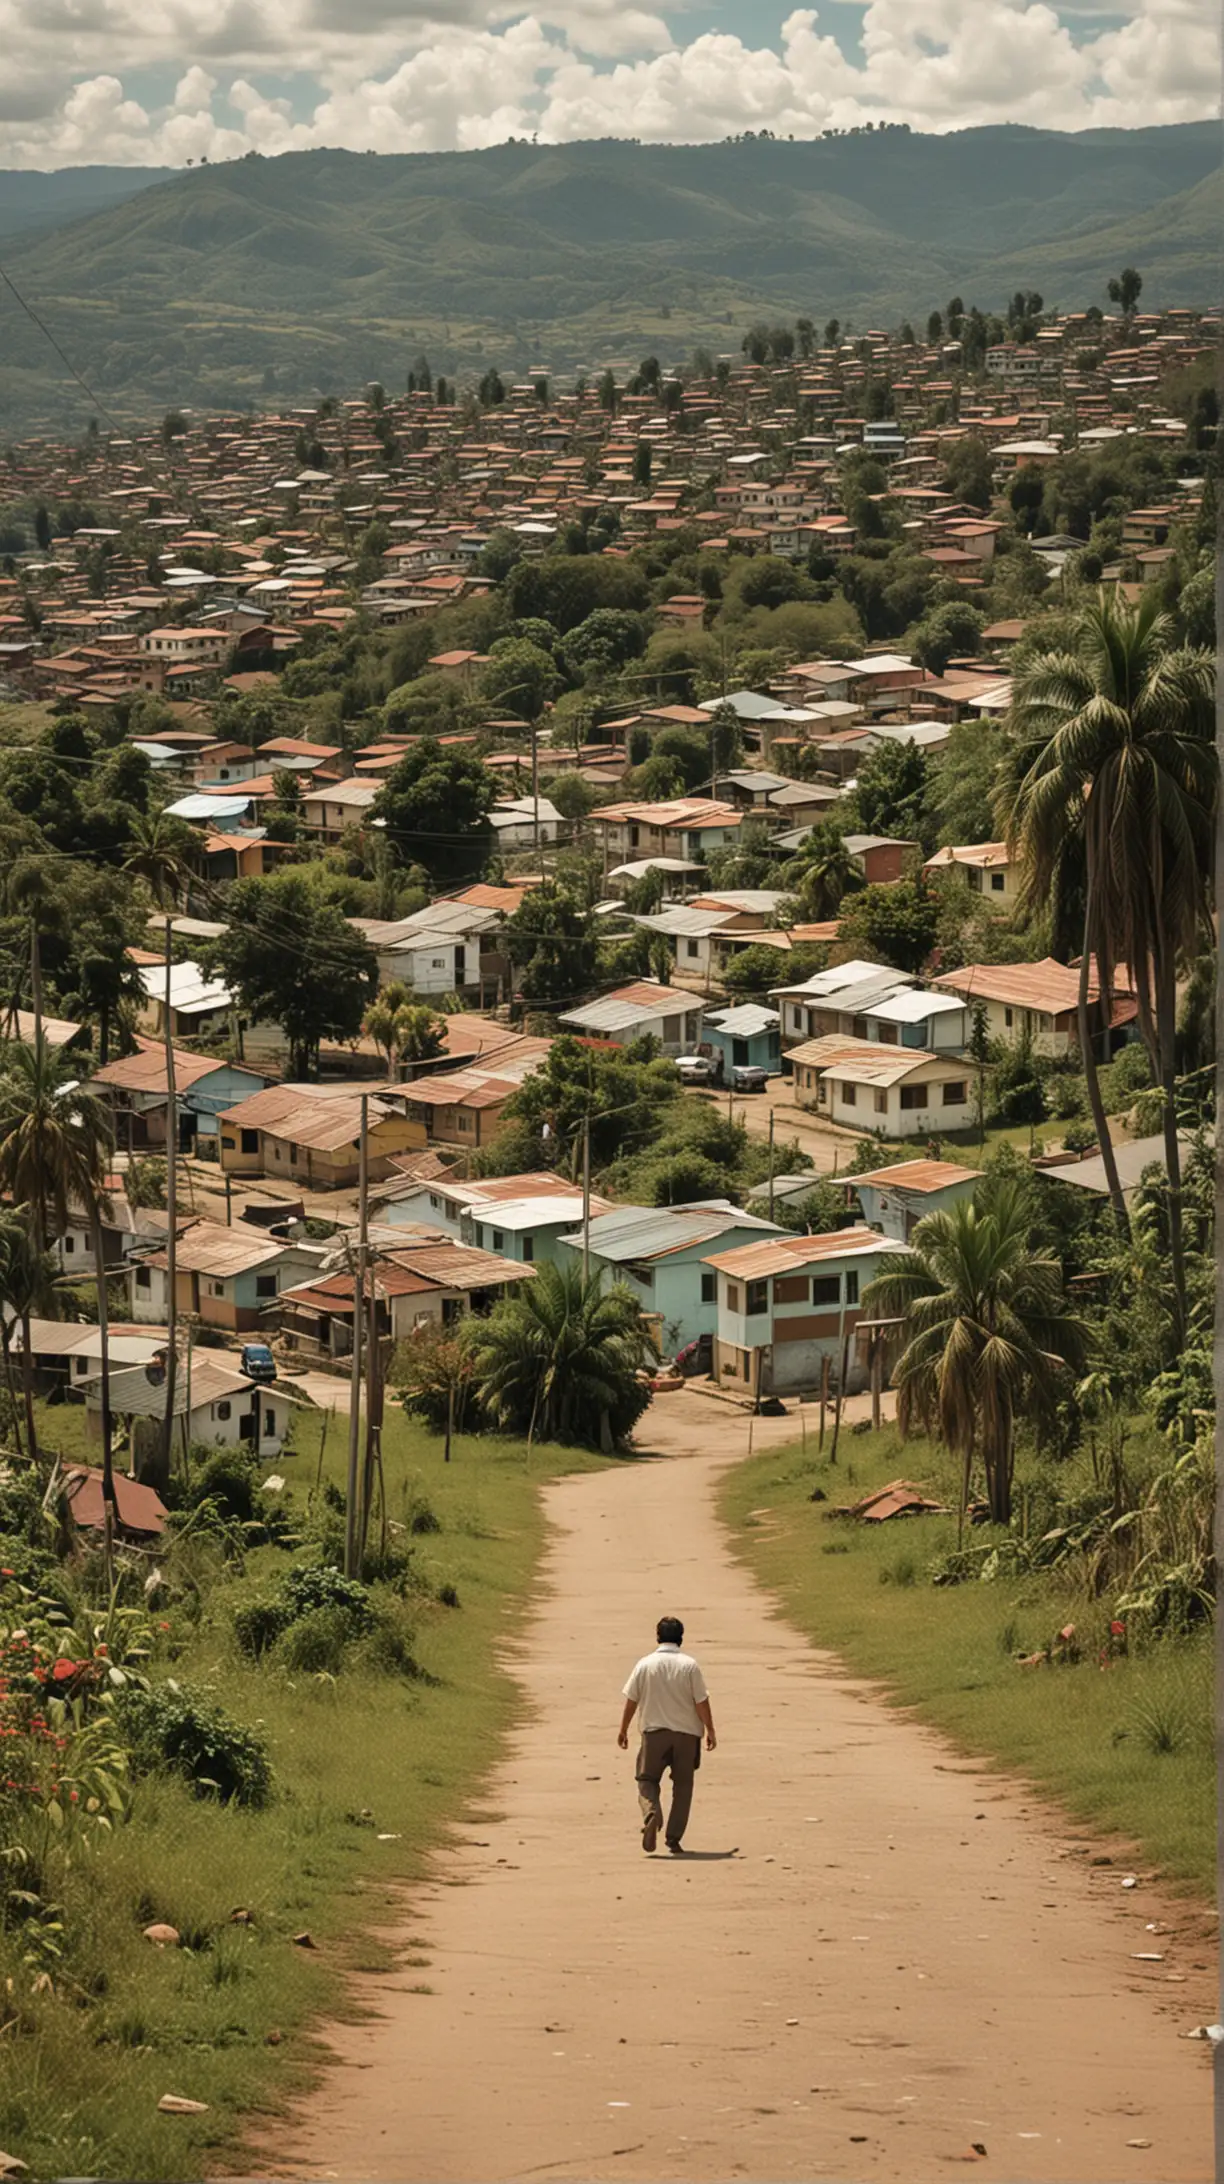 Childhood Beginnings: Visualize a humble neighborhood in Rionegro, Colombia, where Pablo Escobar was born on December 1, 1949. Show the modest homes and the surrounding landscapes that shaped his early years.